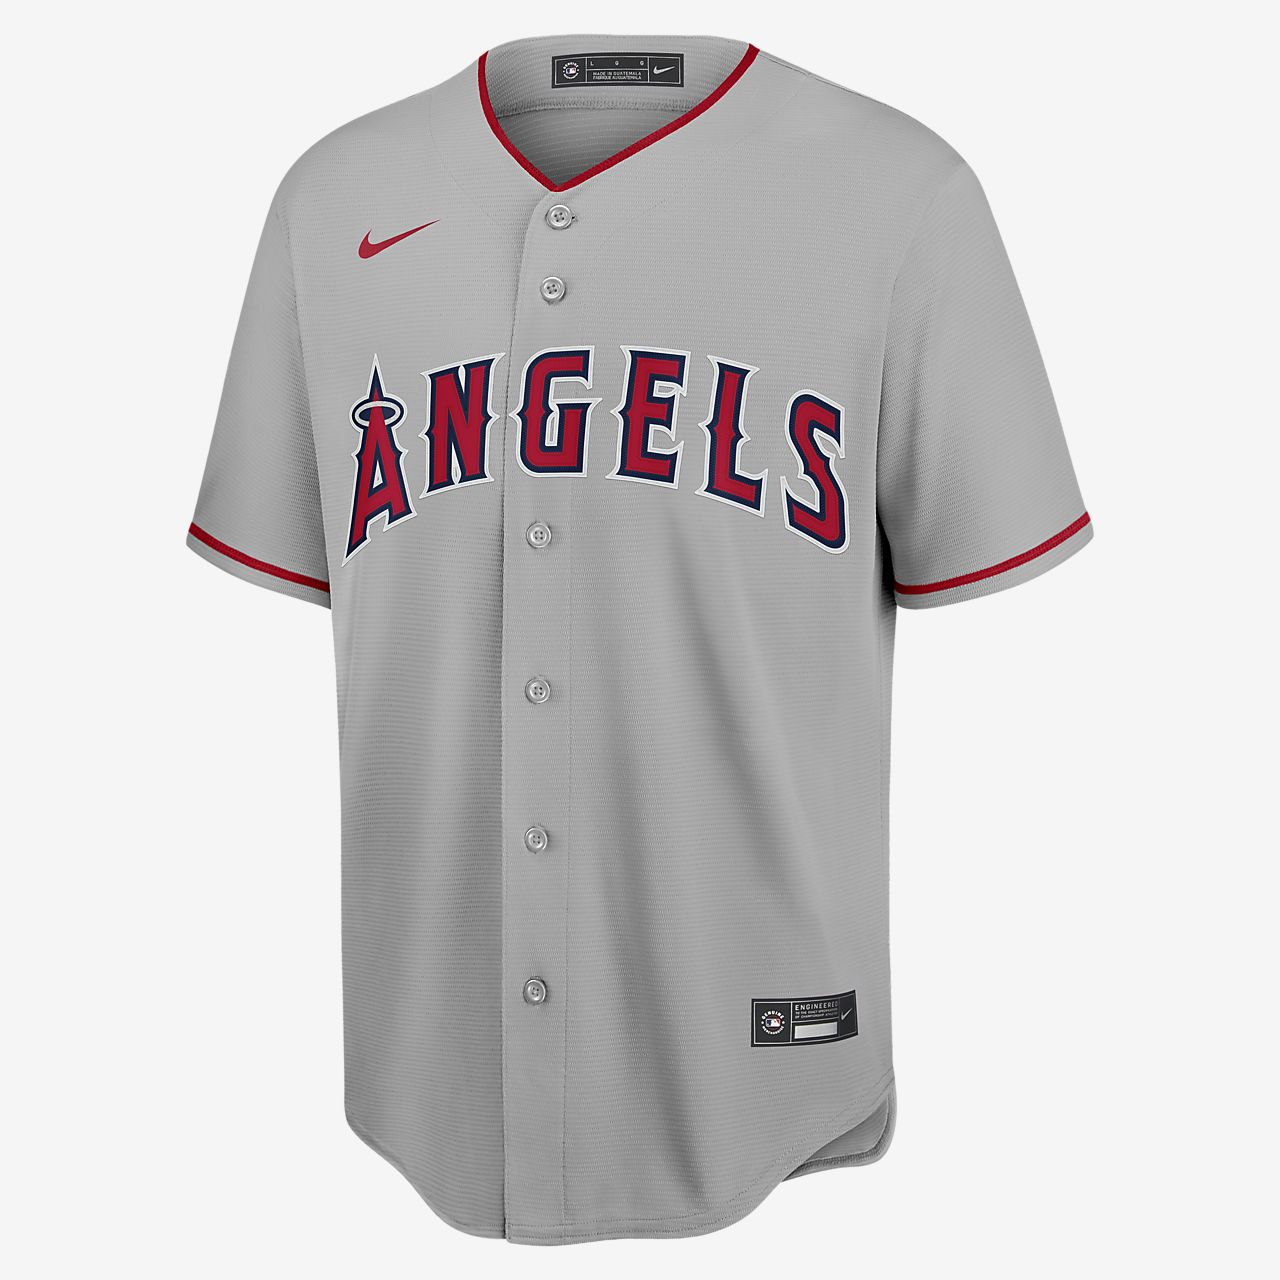 mike trout kids jersey